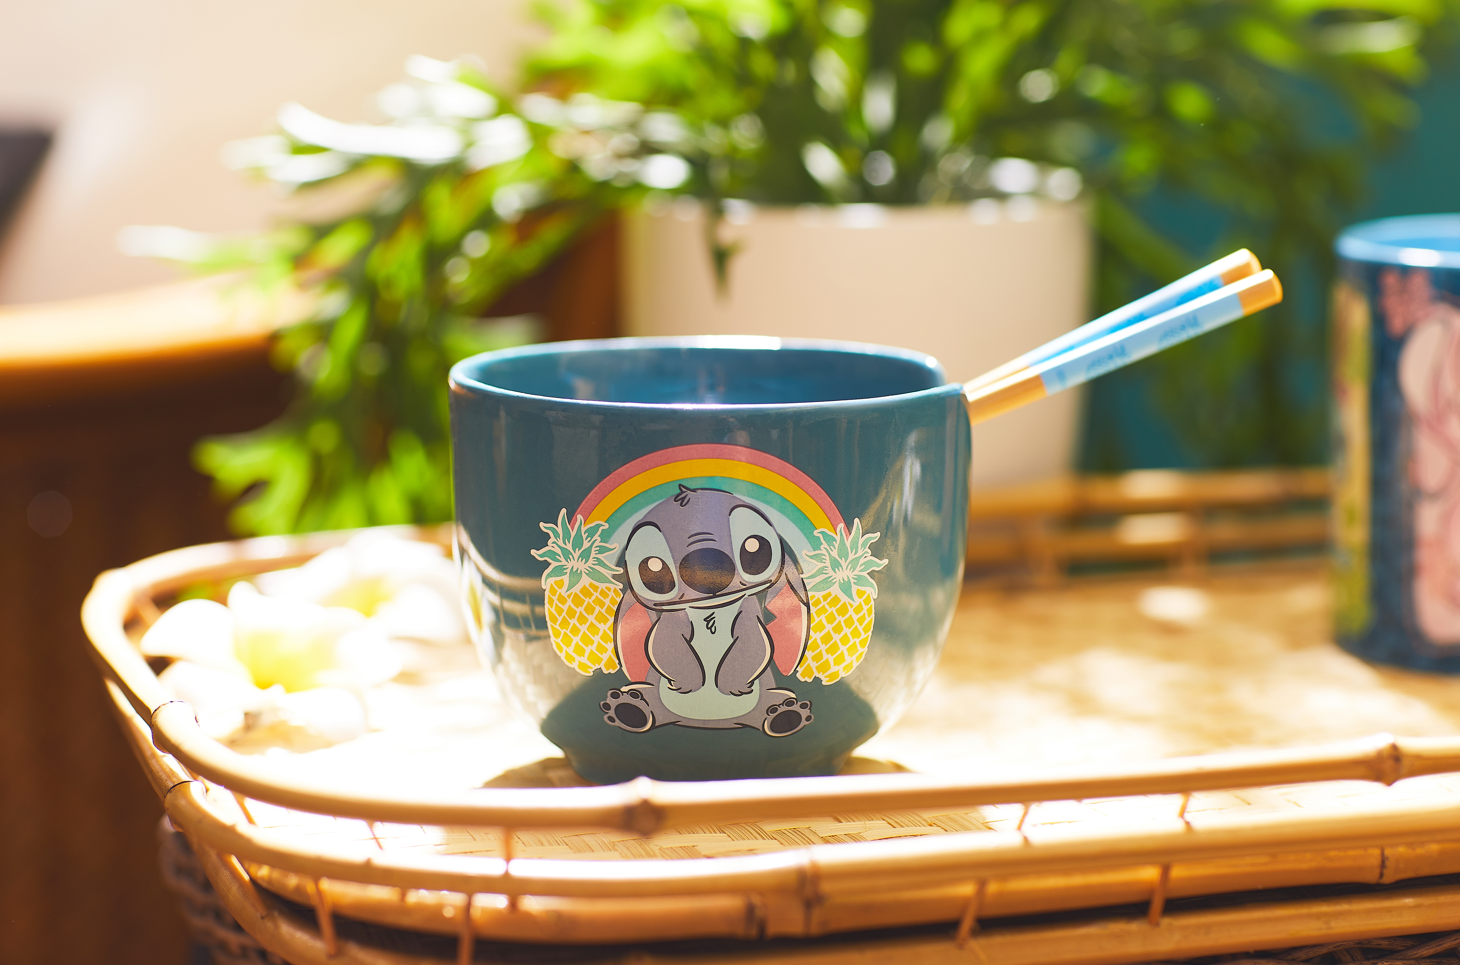 New on shopDisney (6/26/18): Celebrate Stitch Day With These 5 Items  Inspired by Experiment 626